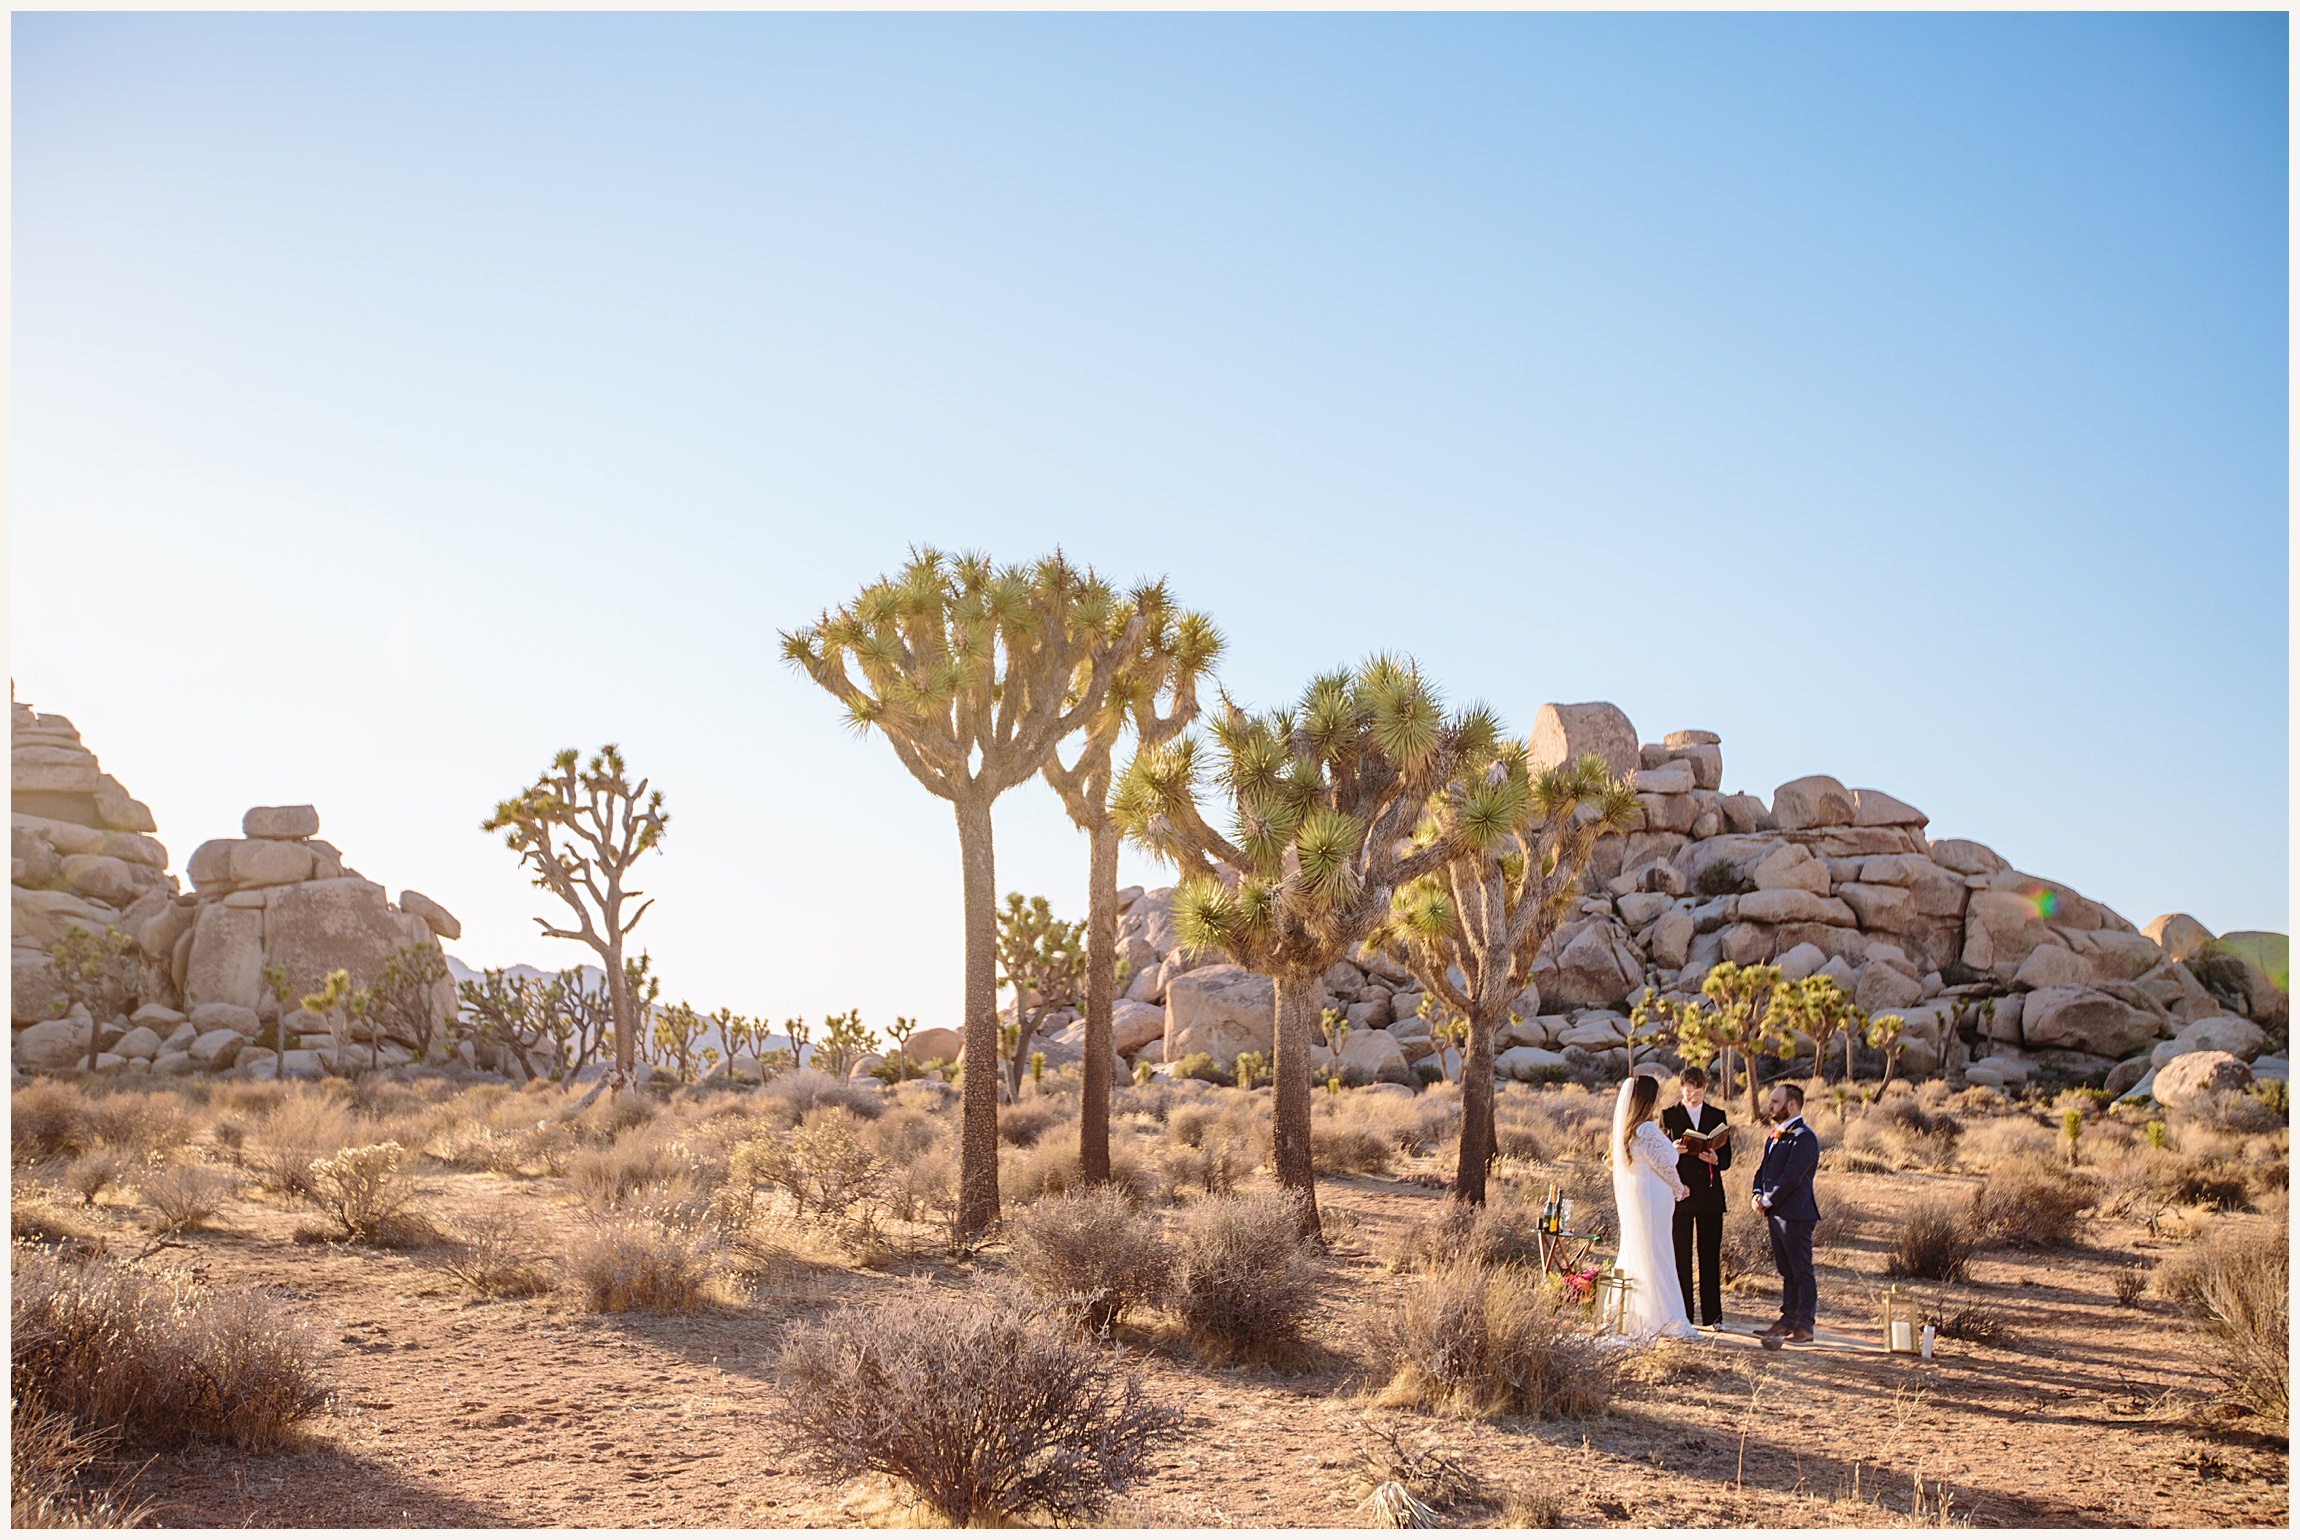 Photo of bride, groom and officiant during elopement cermeony in Joshua Tree